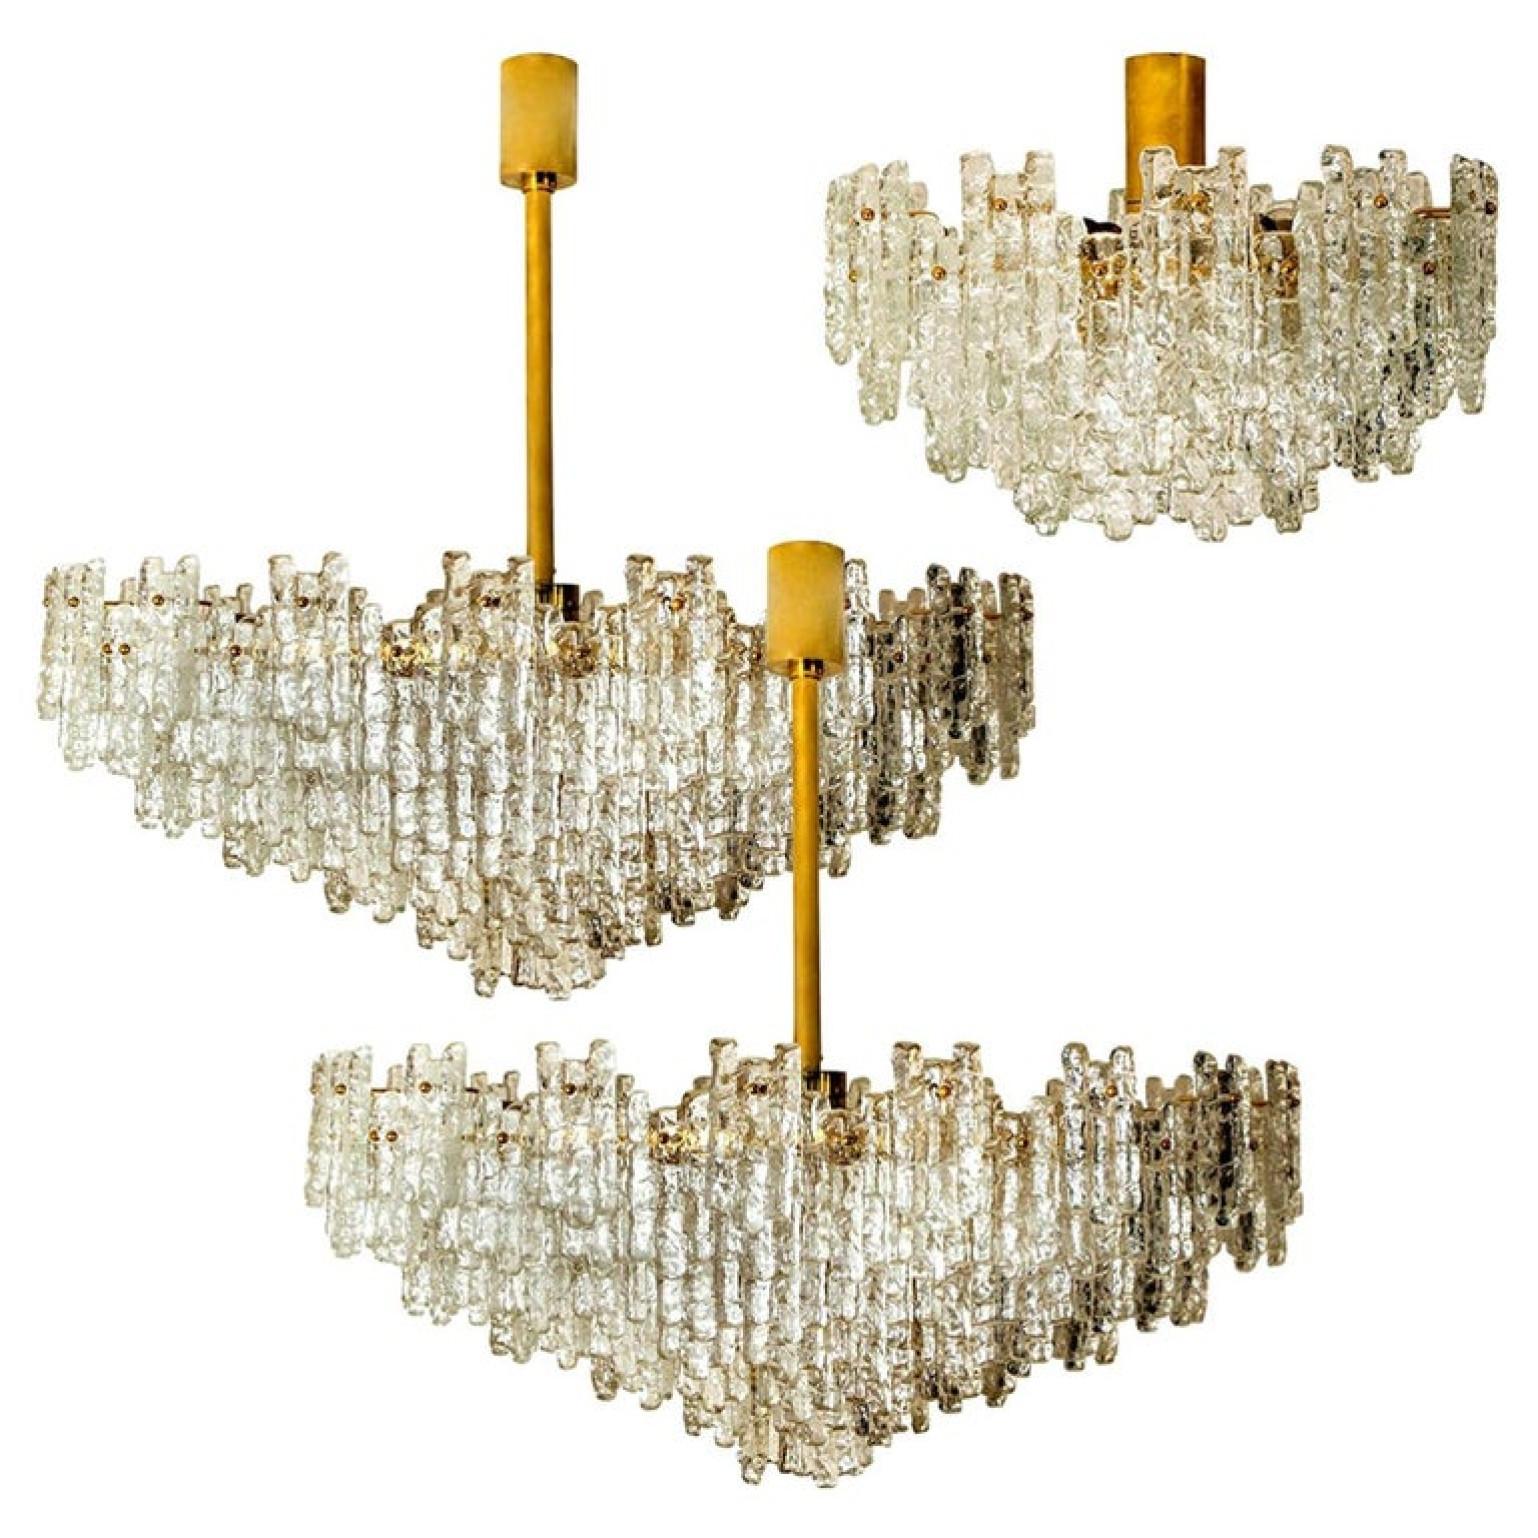 Set of exceptional, huge, clean and modern ballroom flush mount chandeliers by J.T. Kalmar Leuchten from the 1960s. The set consists layers with several hand blown textured glass shades mounted on a brass frame arranged in concentric rings.

This